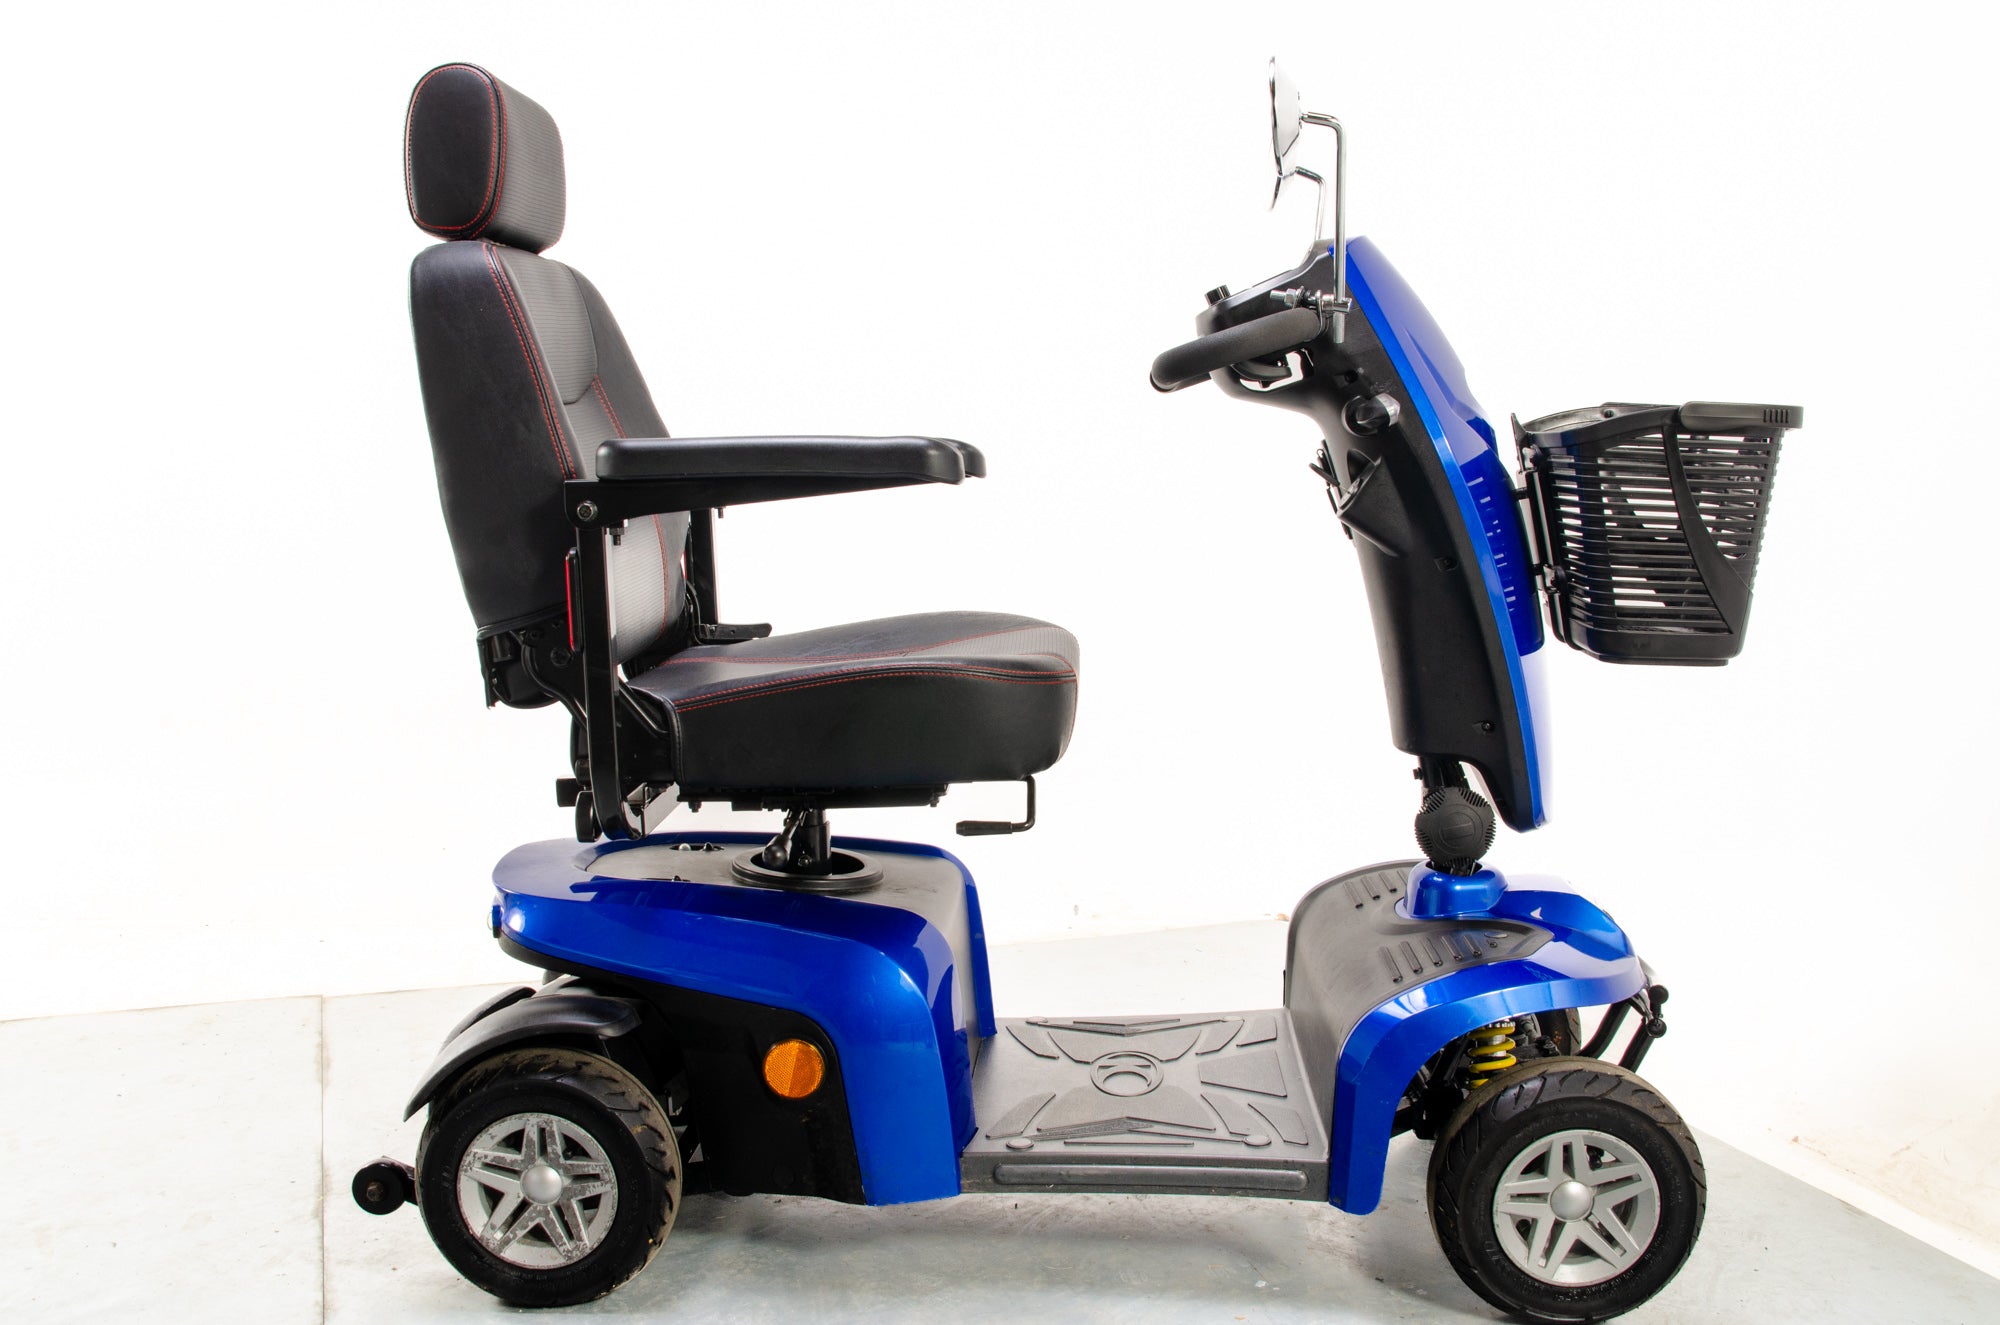 Kymco Komfy 4 Used Mobility Scooter Pavement Suspension Pneumatic Tyres Comfort 4mph Blue